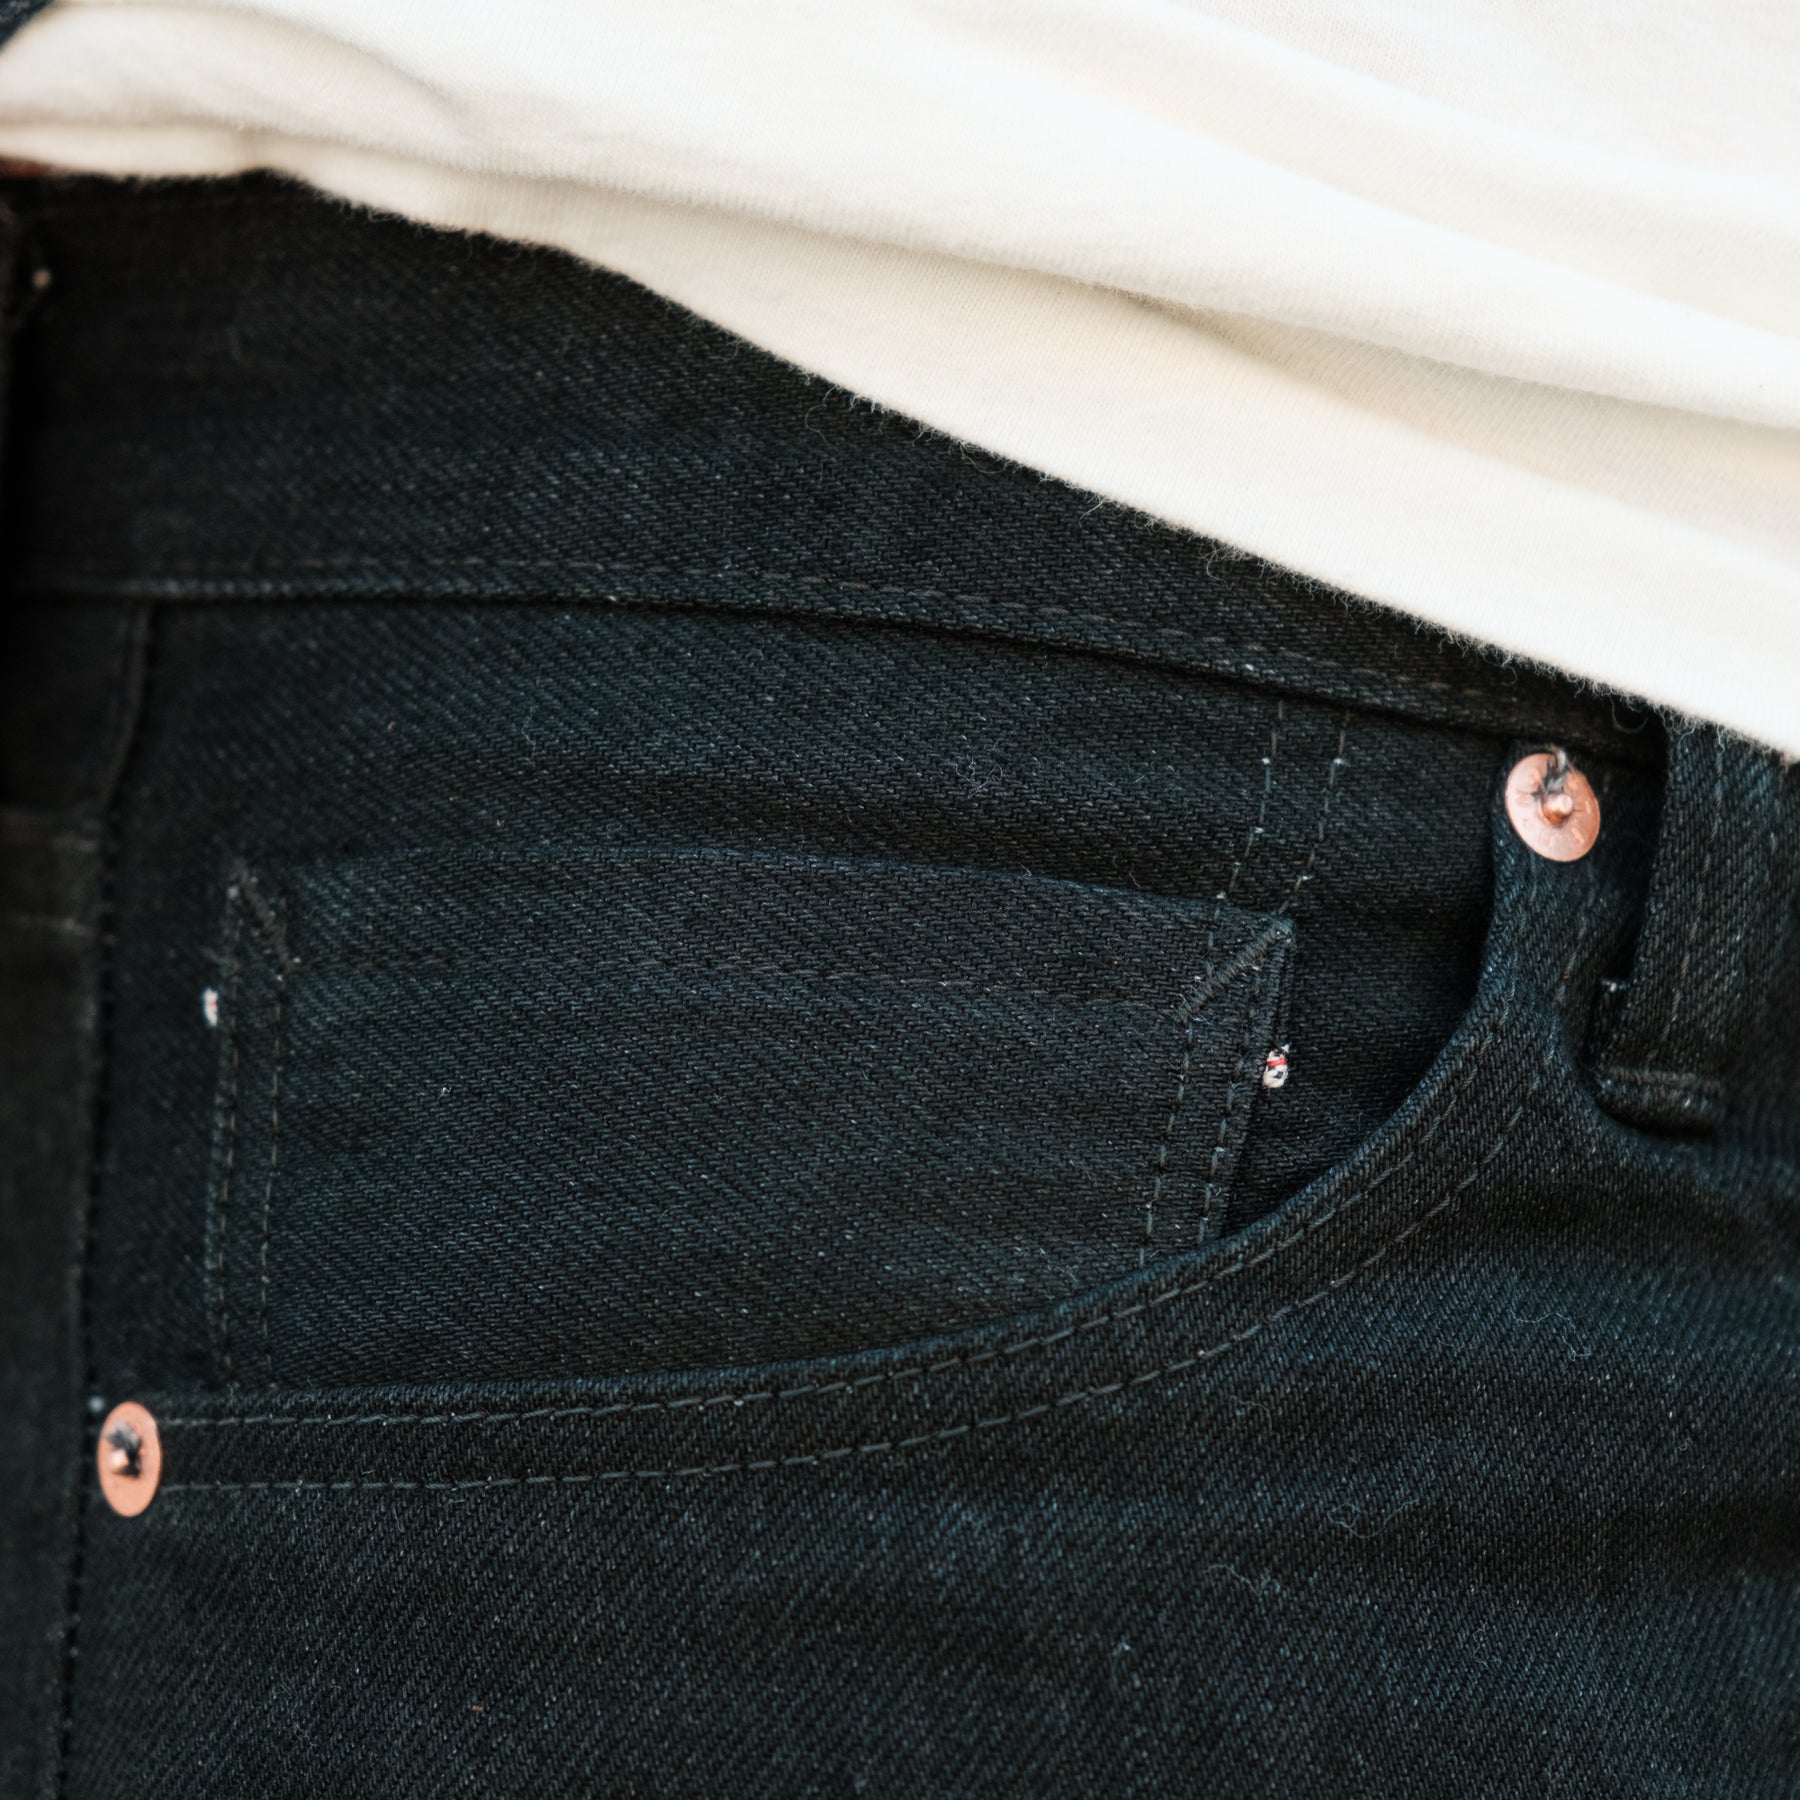 Black Flat Head The Straight Jeans Tapered